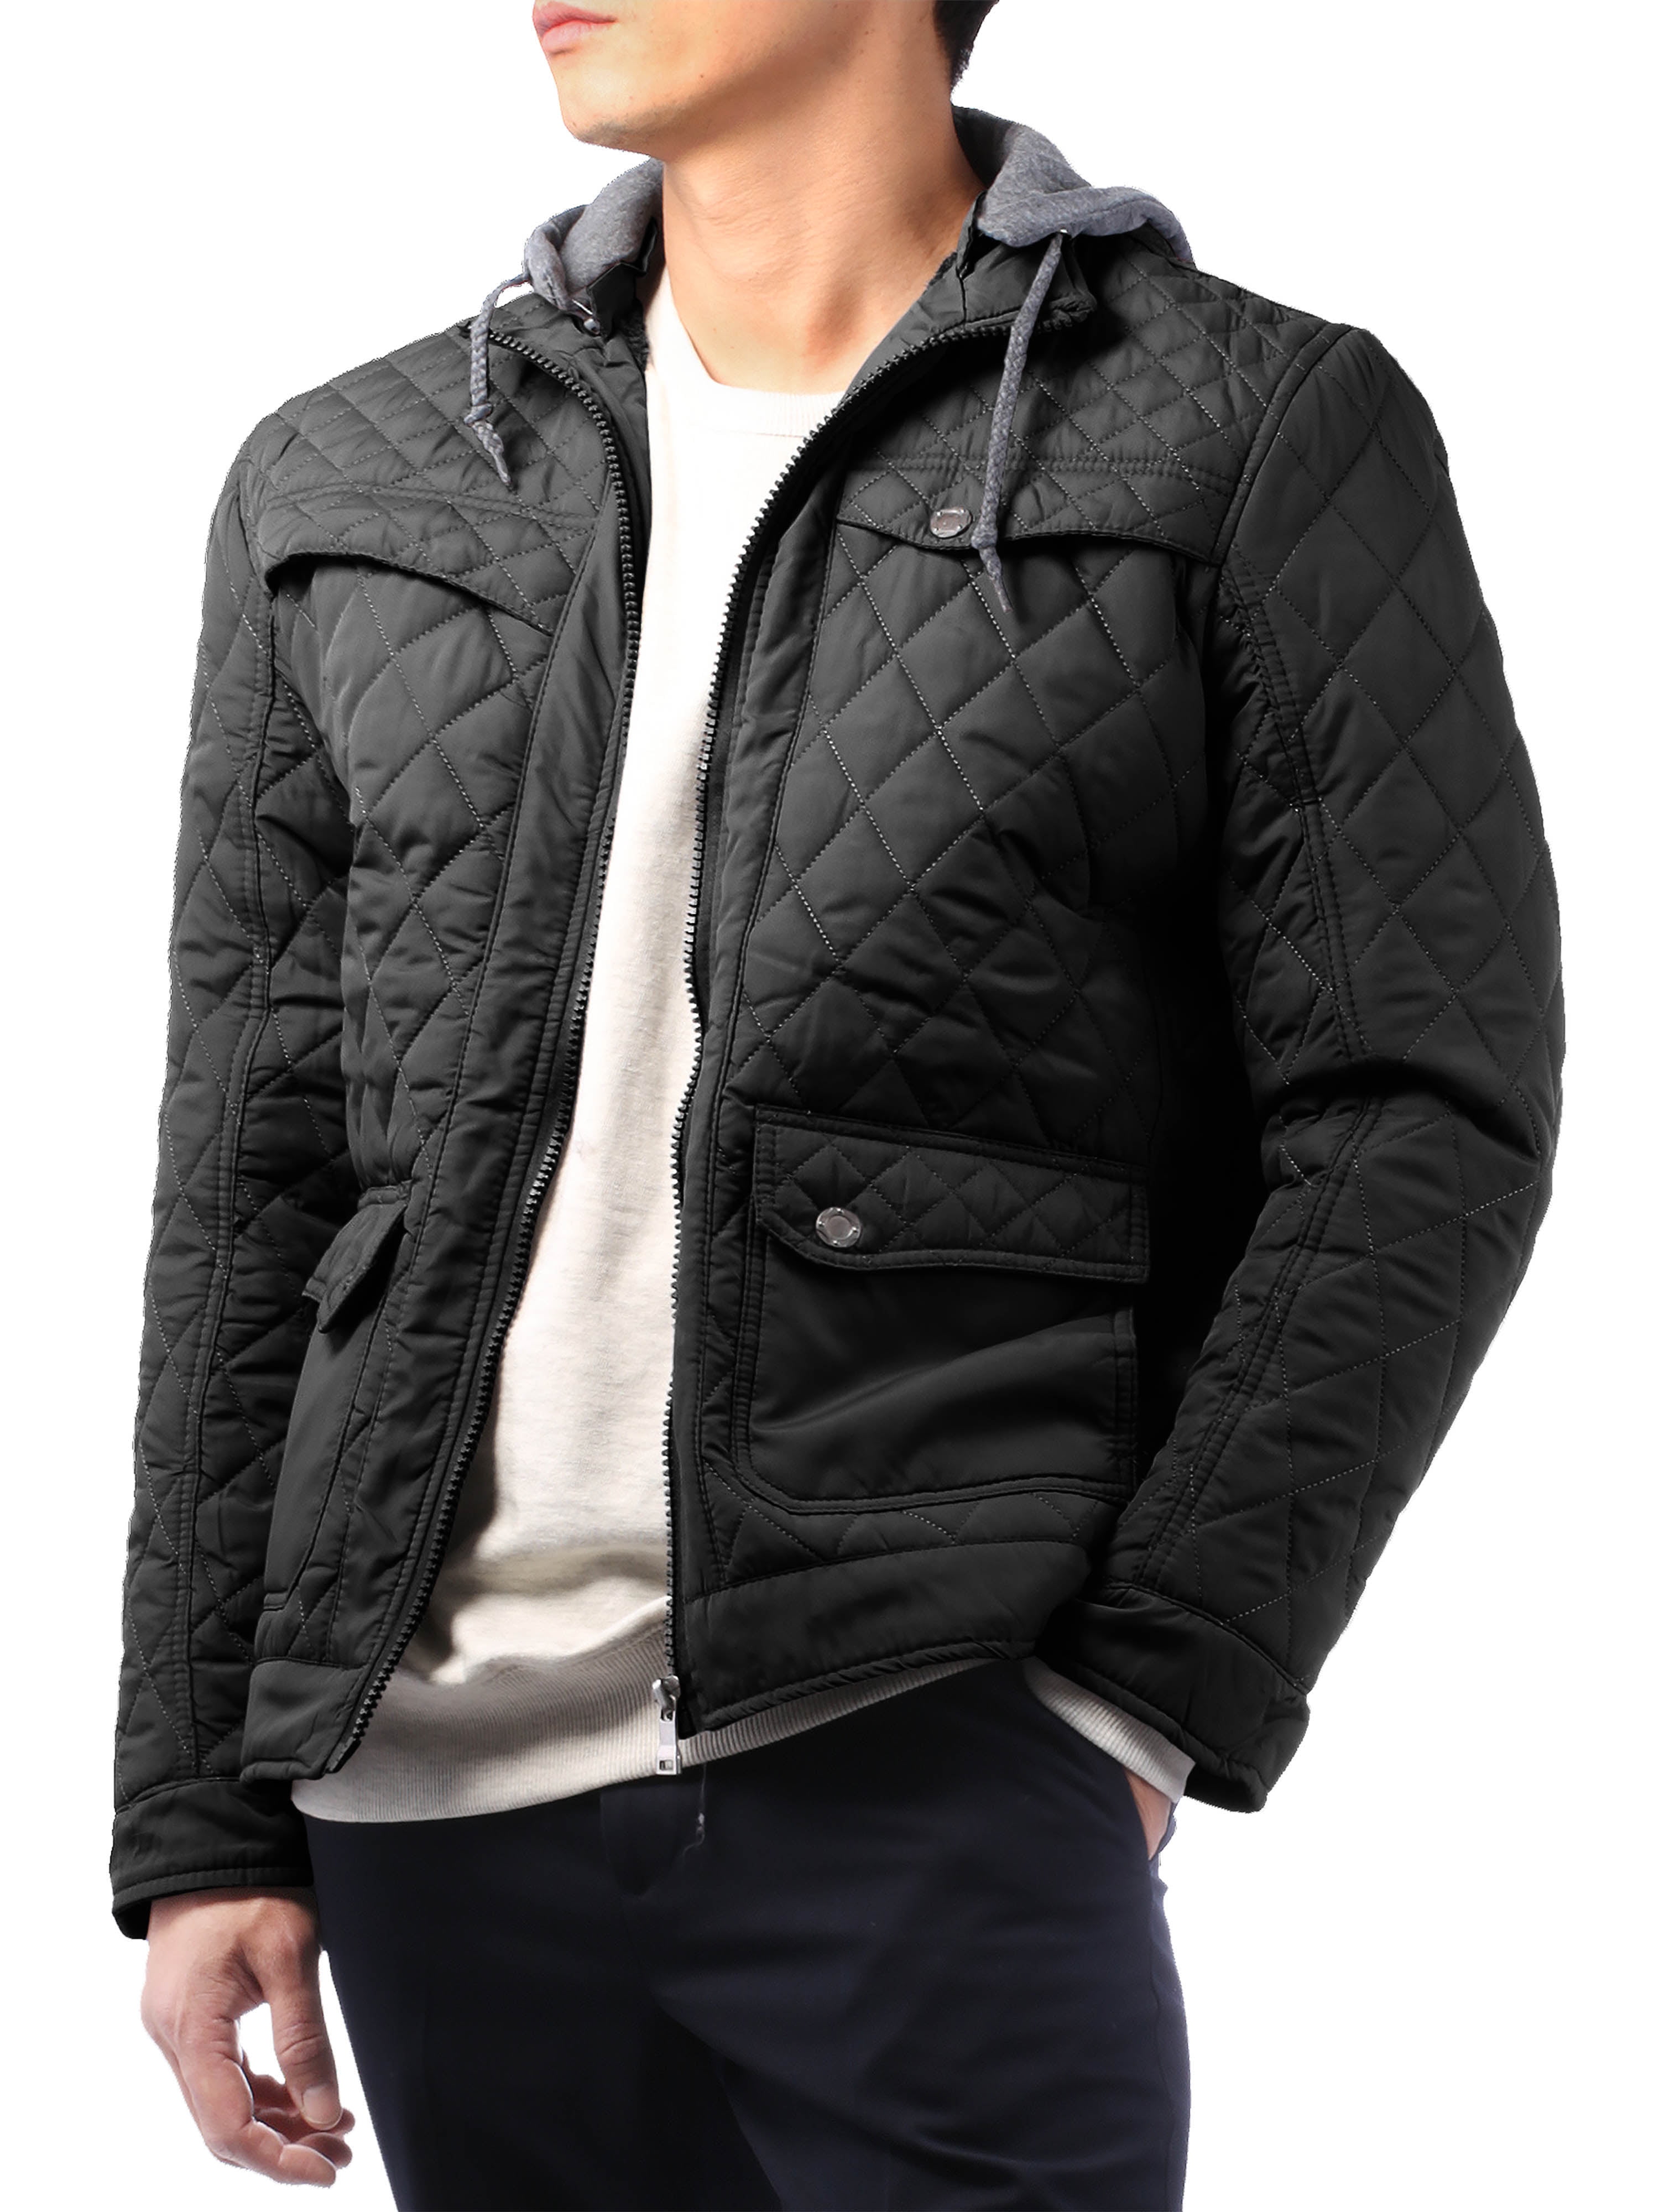 Ma Croix Mens Quilted Jacket Business Casual Diamond Fleece Lined ...